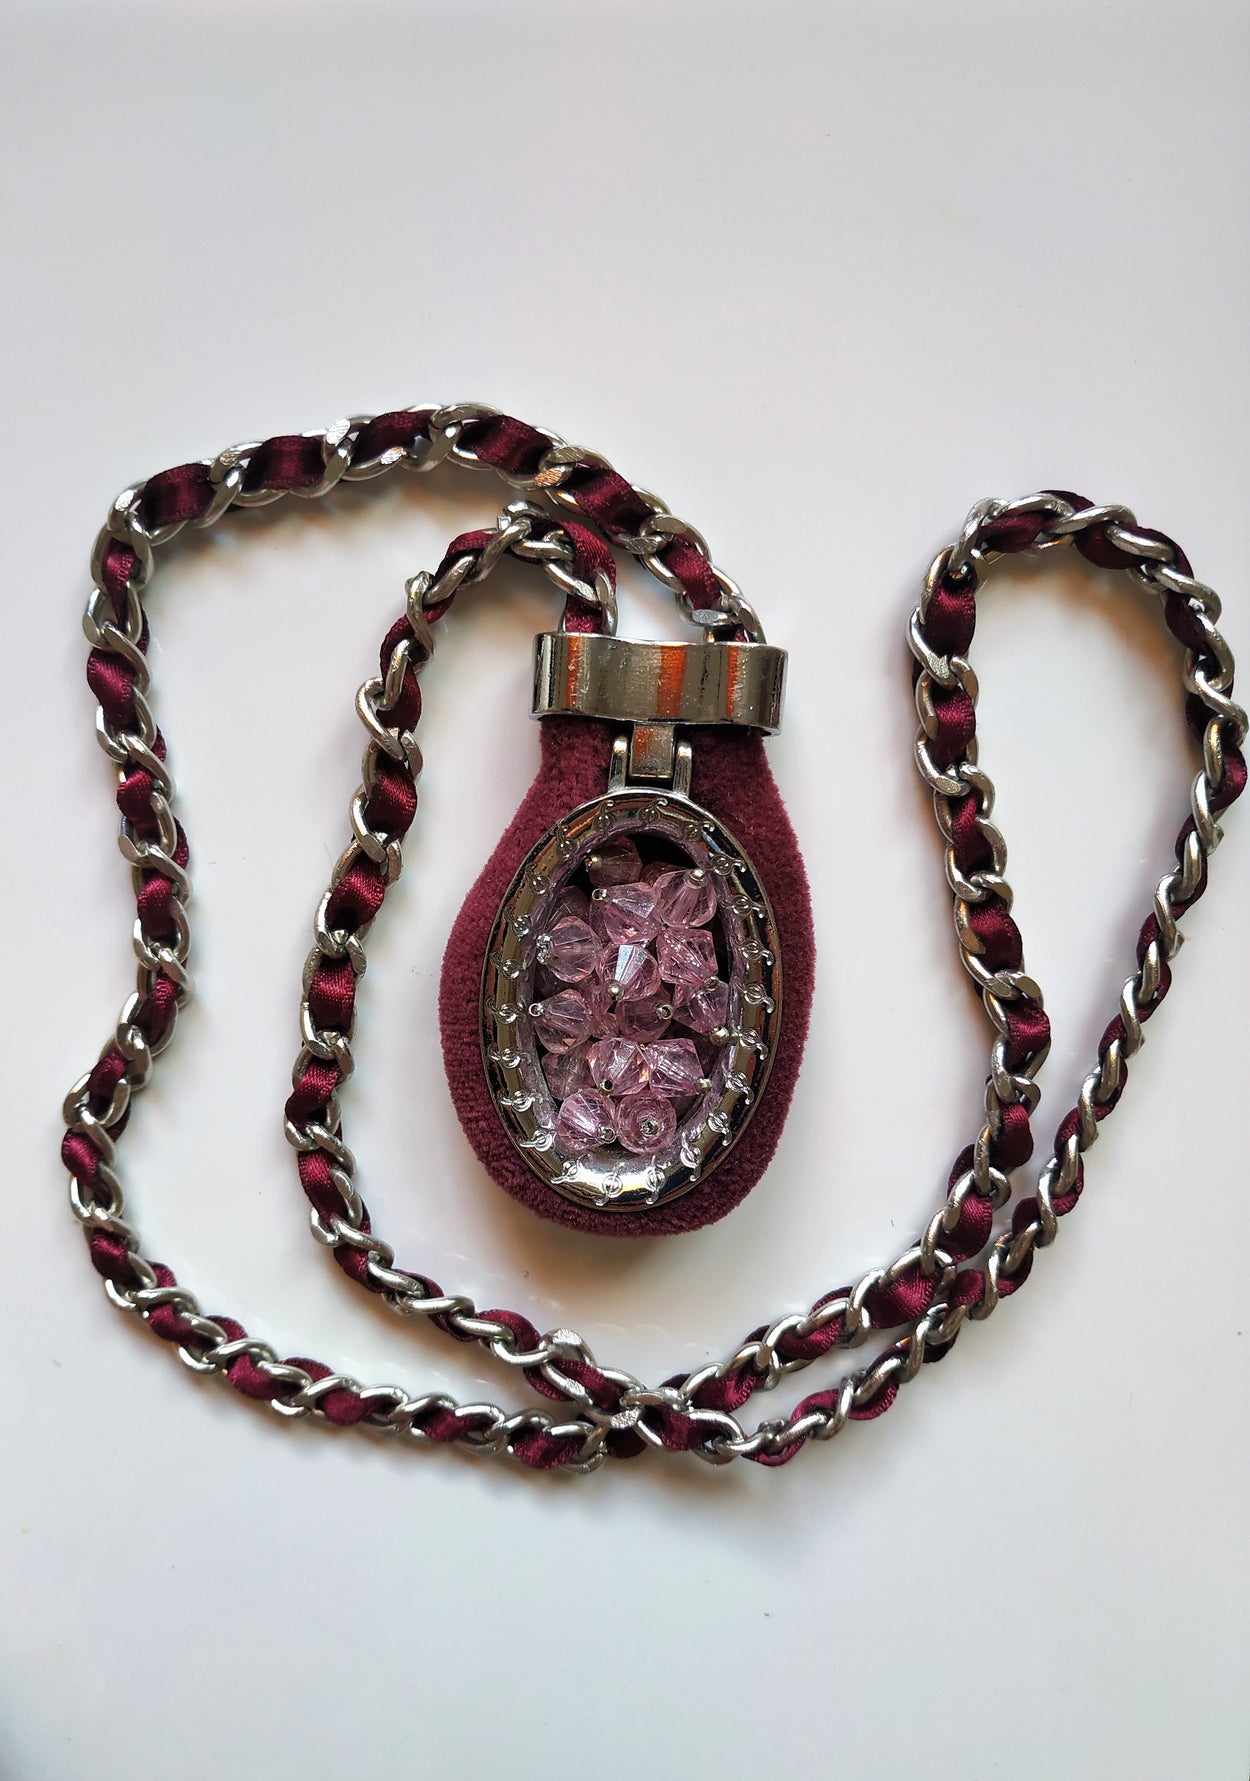 A massive shiny chain with a large wine-colored pendant